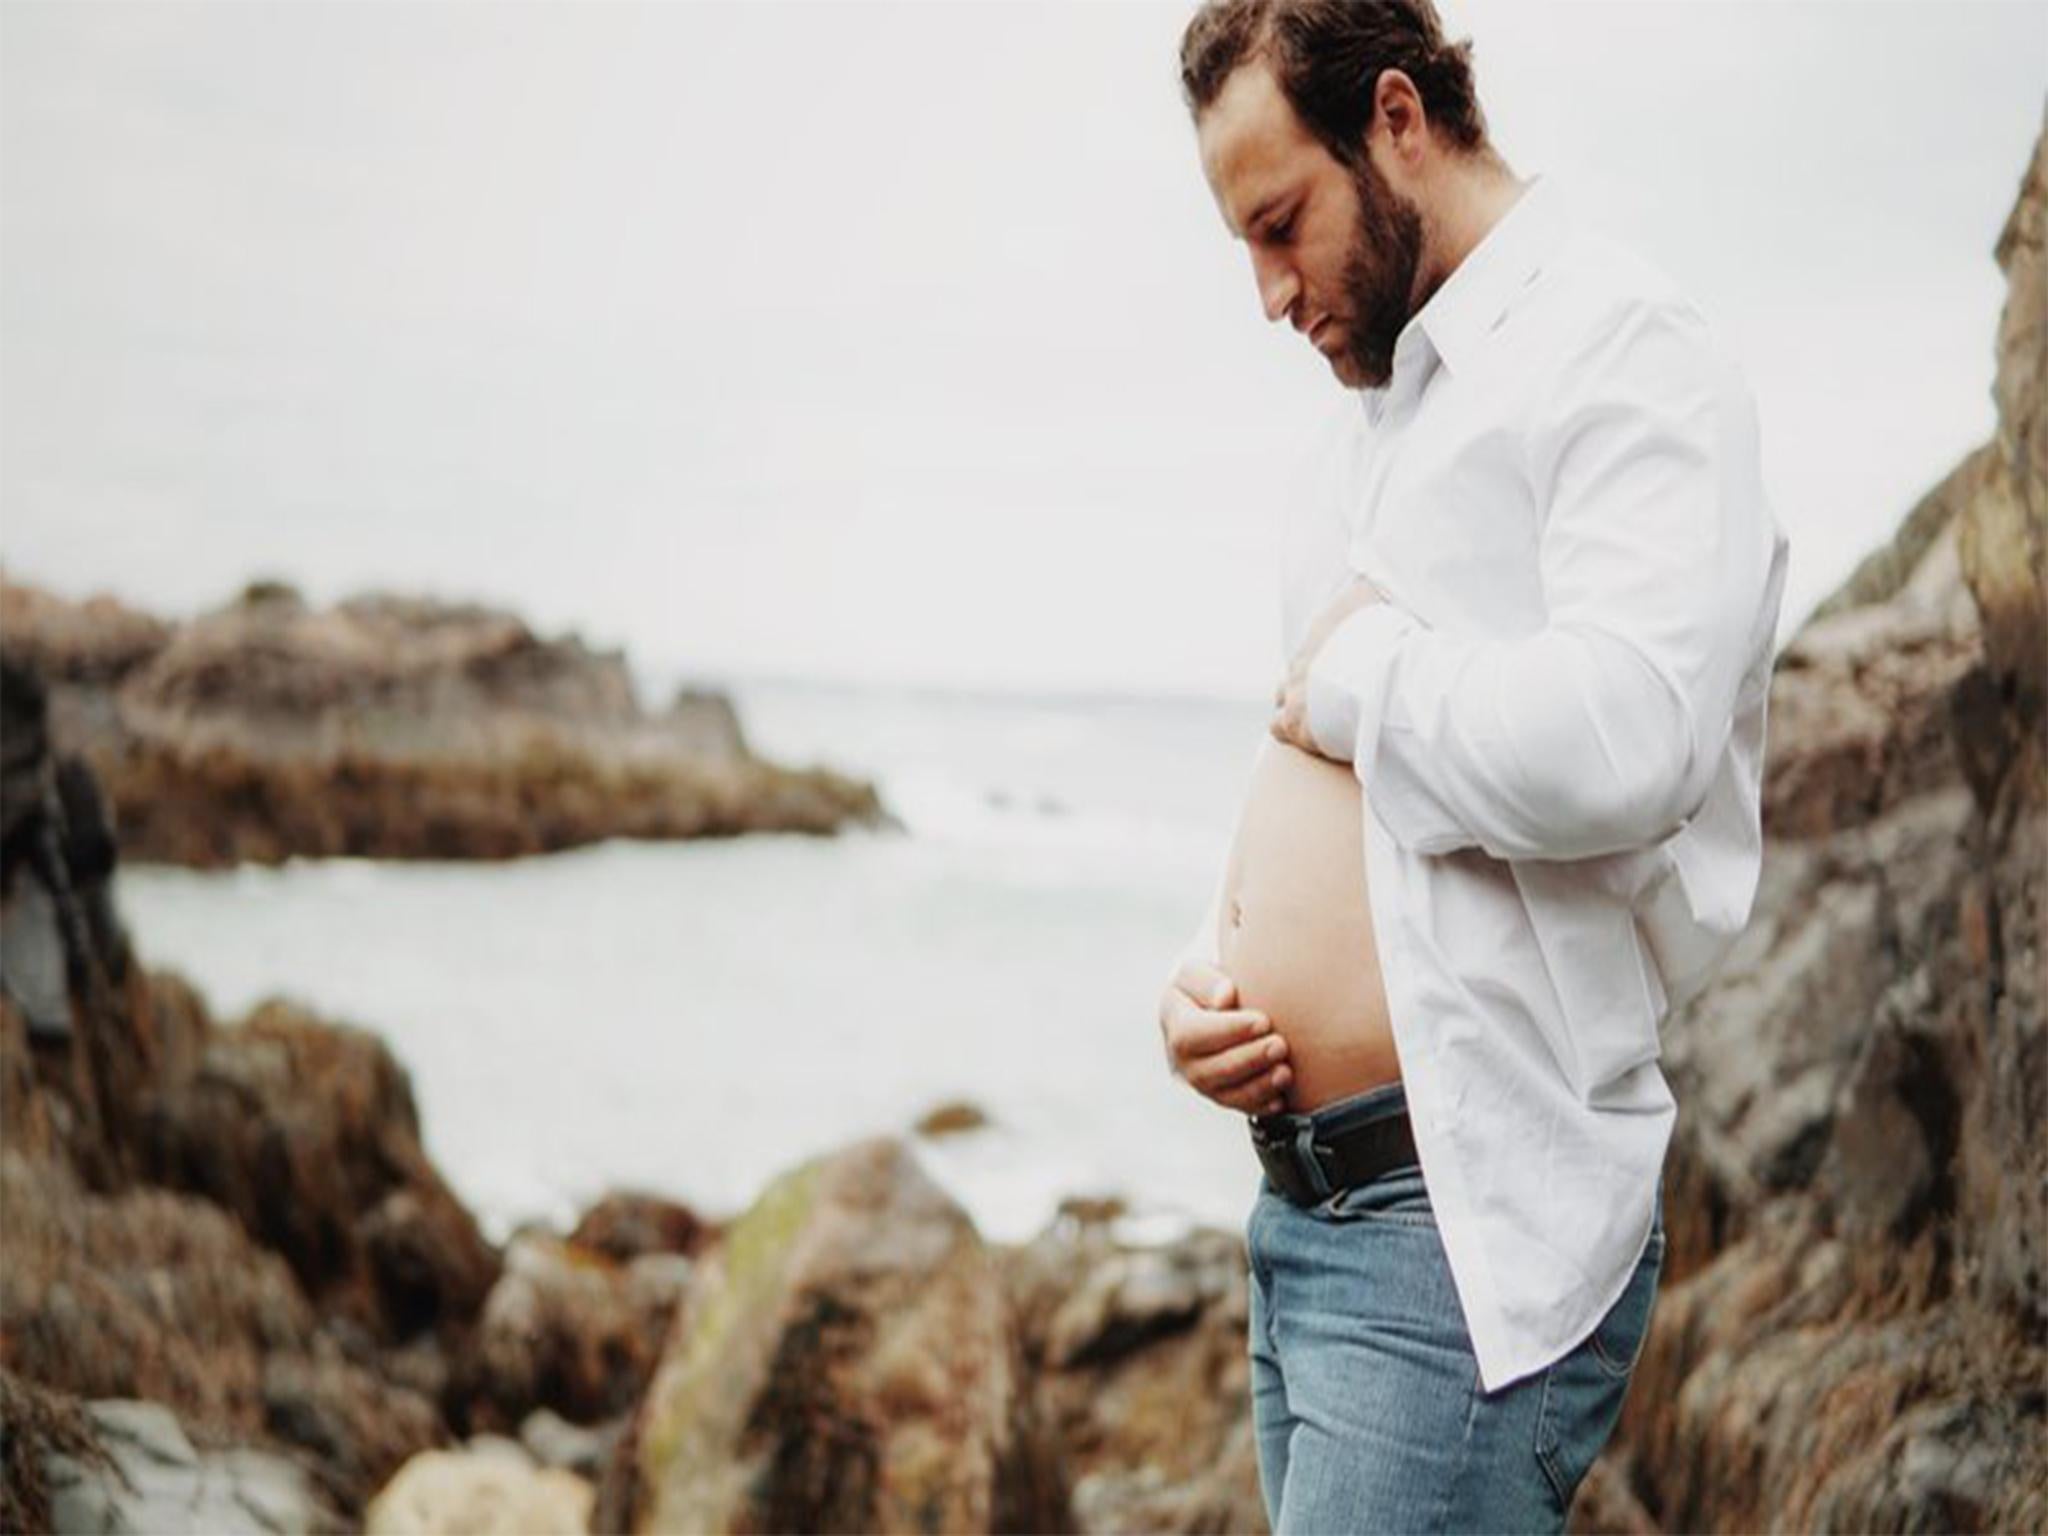 The soon-to-be dad said it was 'extremely difficult' to take images, as he kept laughing